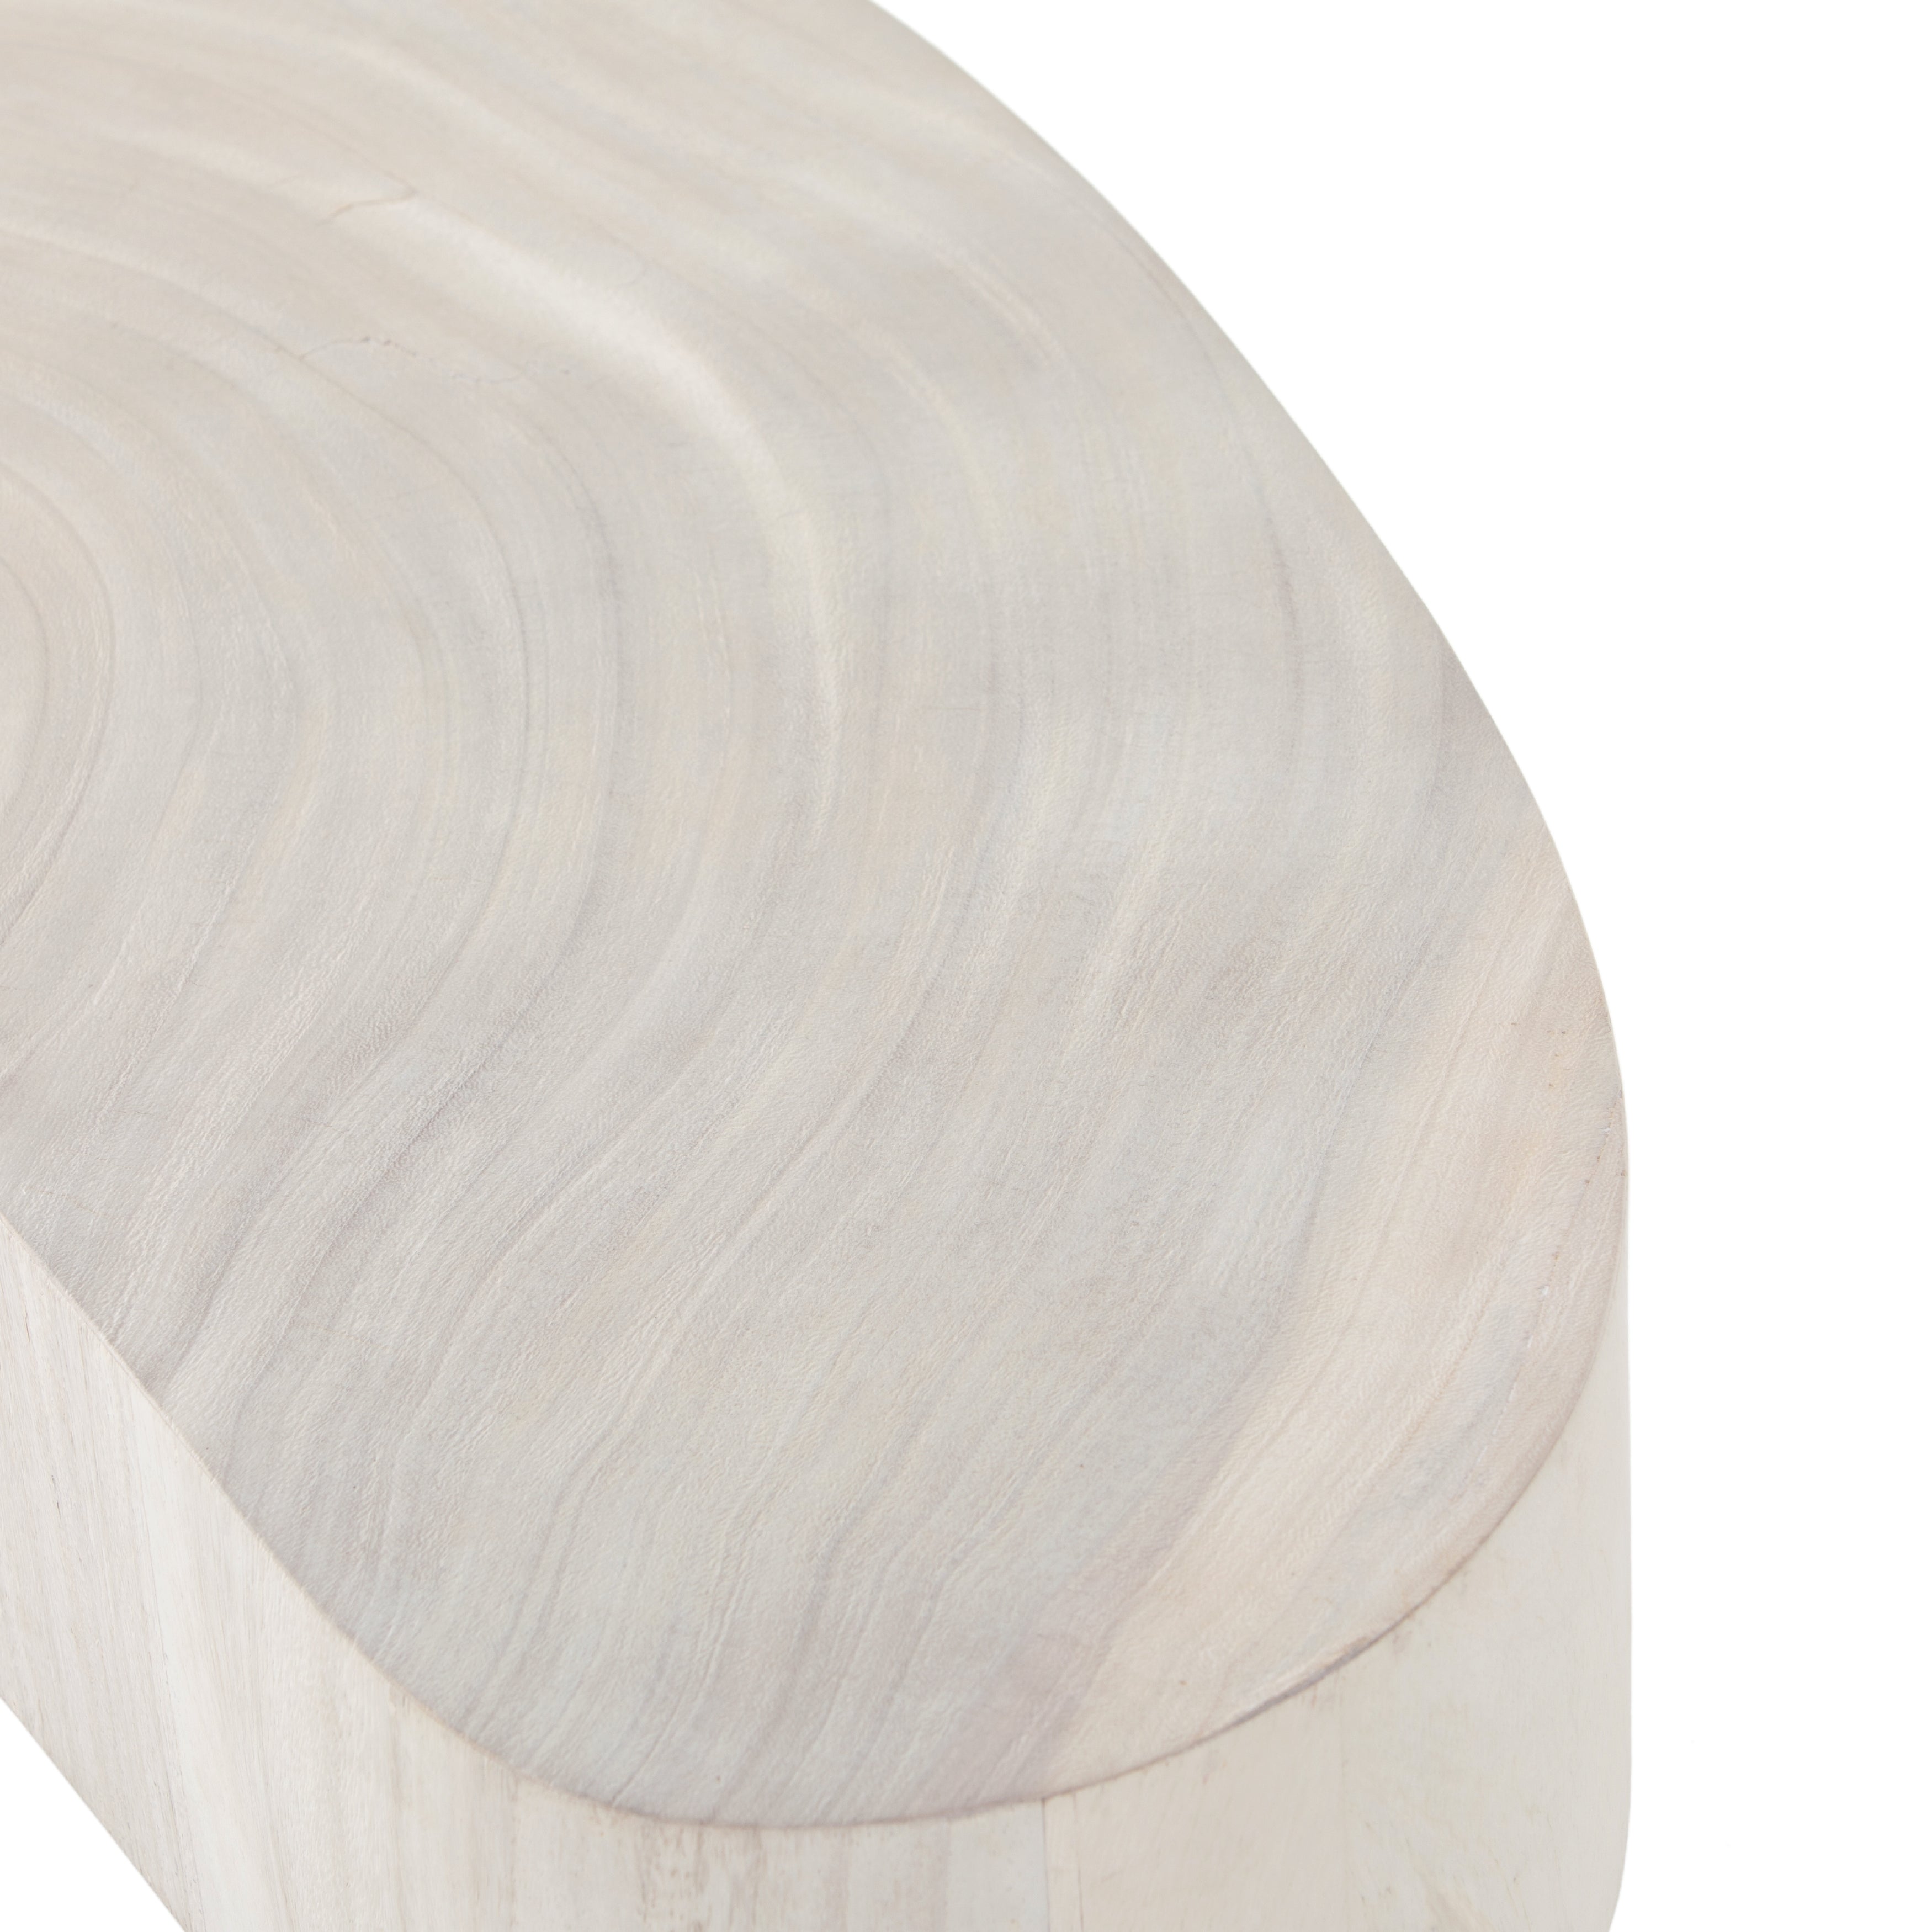 Natural beauty - total novelty. A thick slab of bleached, oyster-cut Guanacaste forms a tall, kidney-shaped coffee table. Visible rings speak to woods' natural graining, while a dark gunmetal-finished base provides clean contrast to the whole look. Amethyst Home provides interior design, new construction, custom furniture, and area rugs in the Salt Lake City metro area.